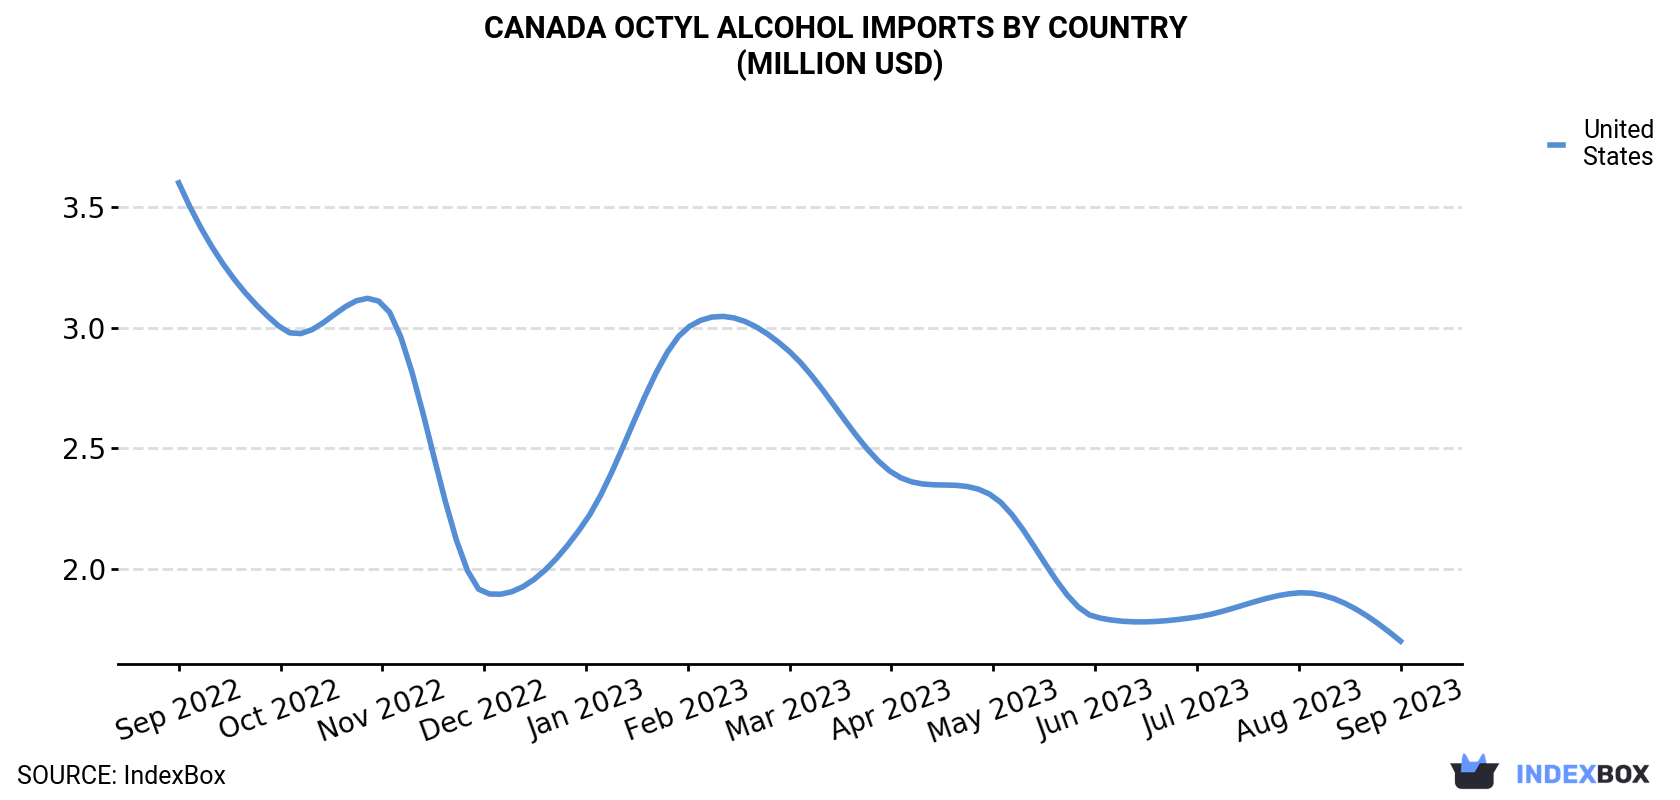 Canada Octyl Alcohol Imports By Country (Million USD)